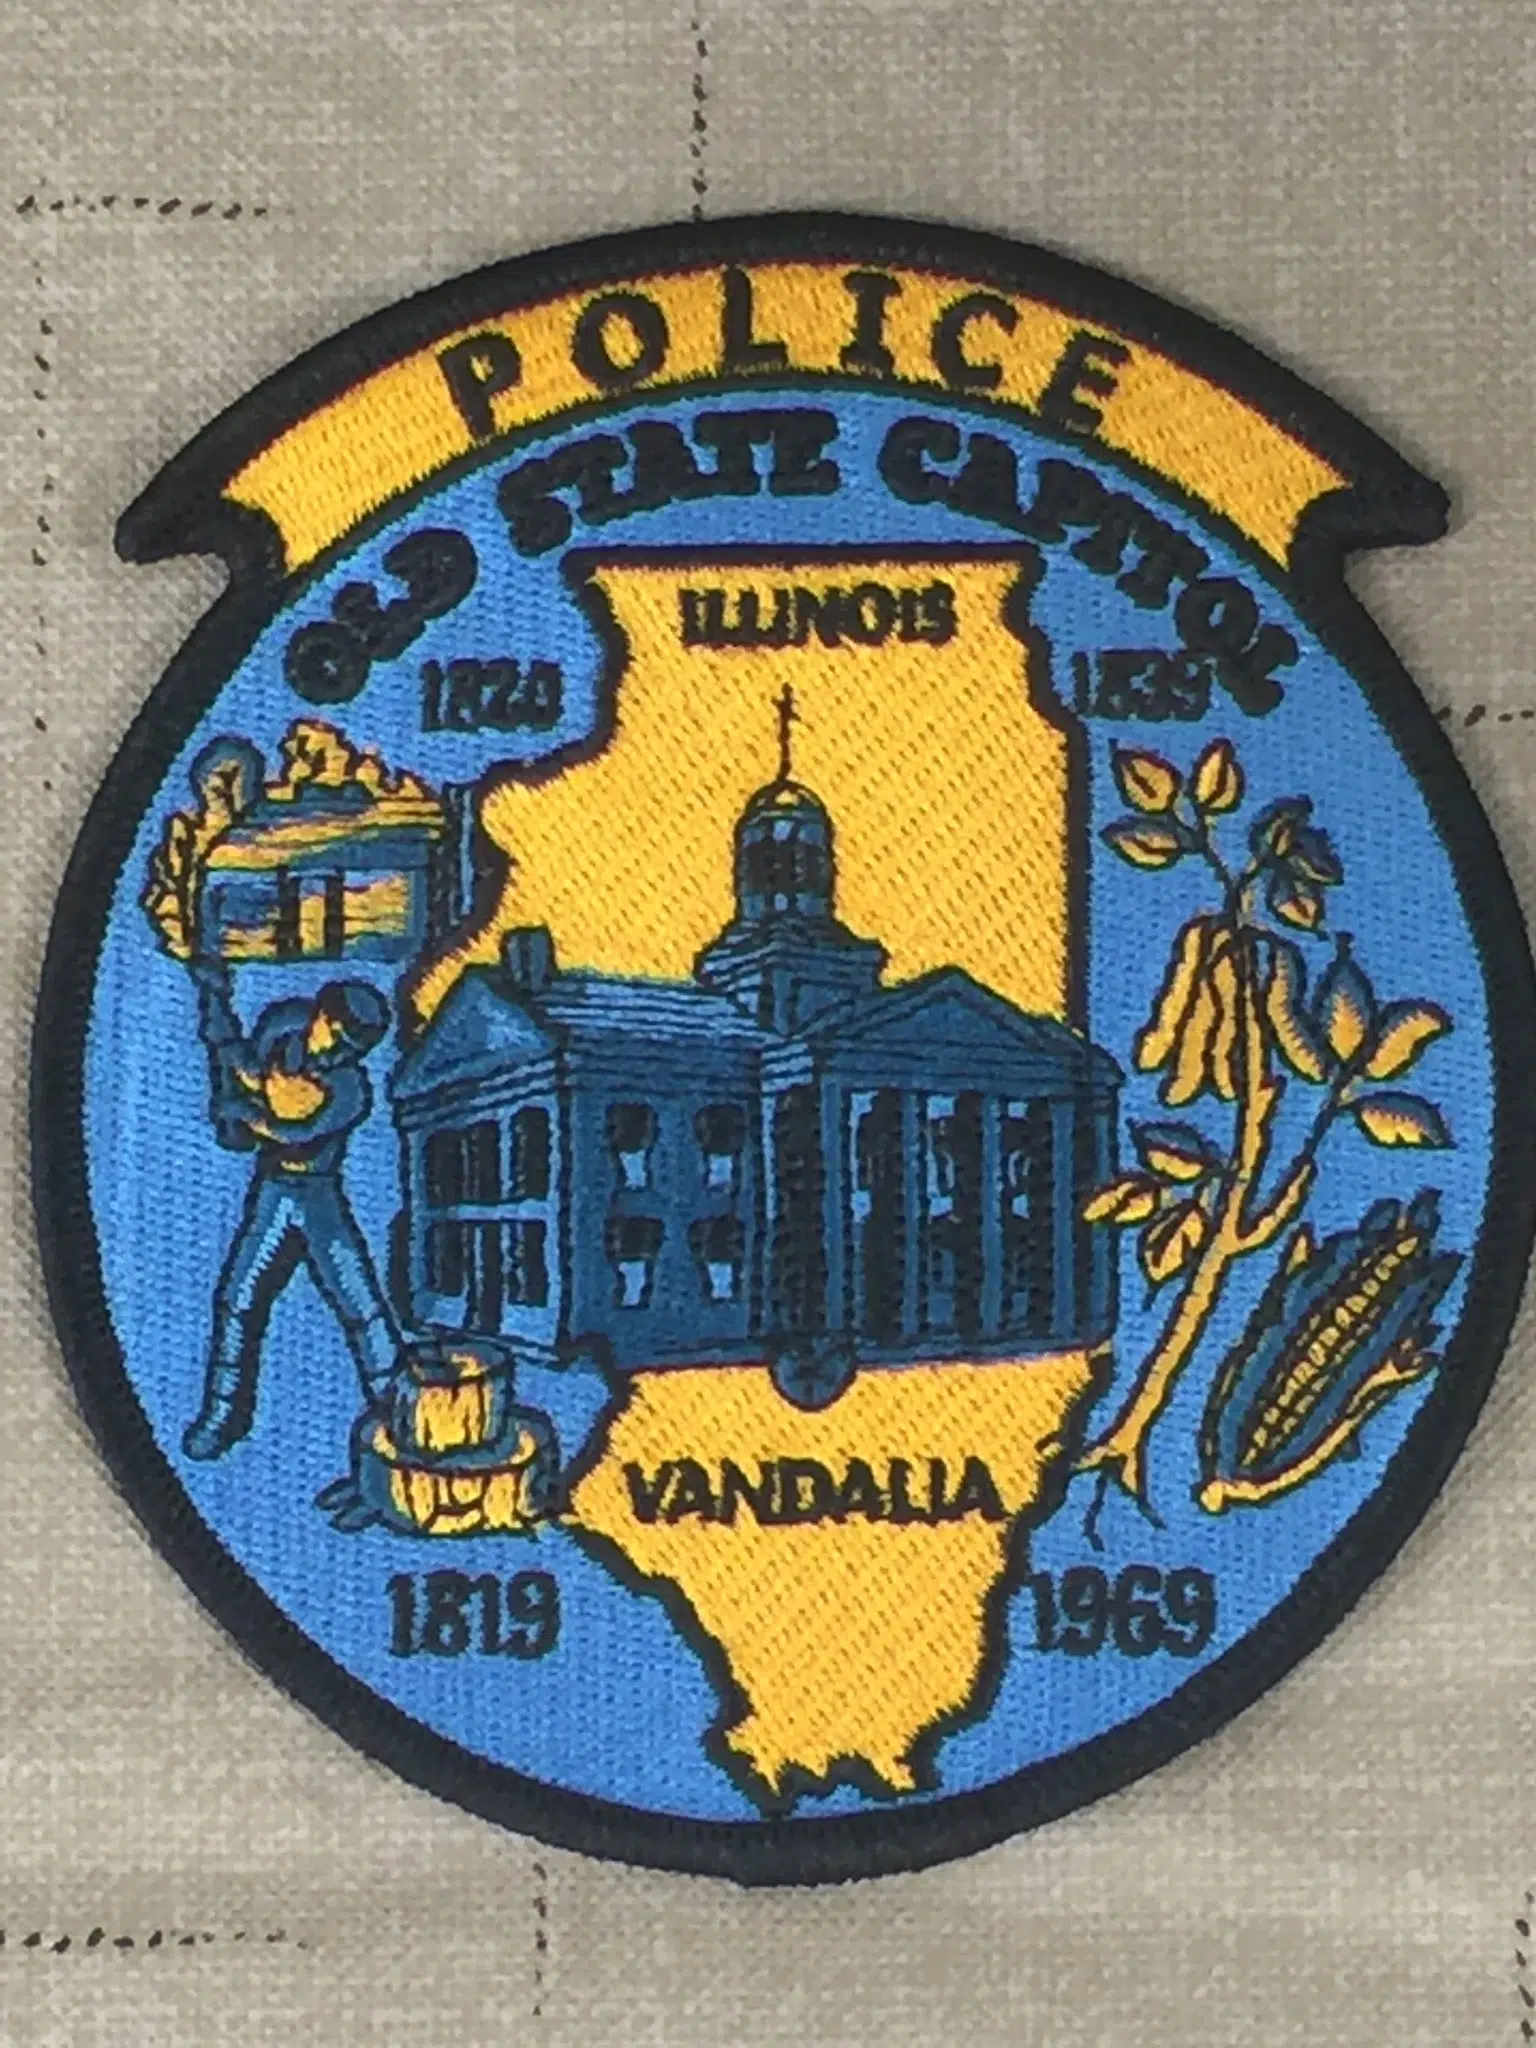 Vandalia PD reminds everyone to make sure your car is locked 